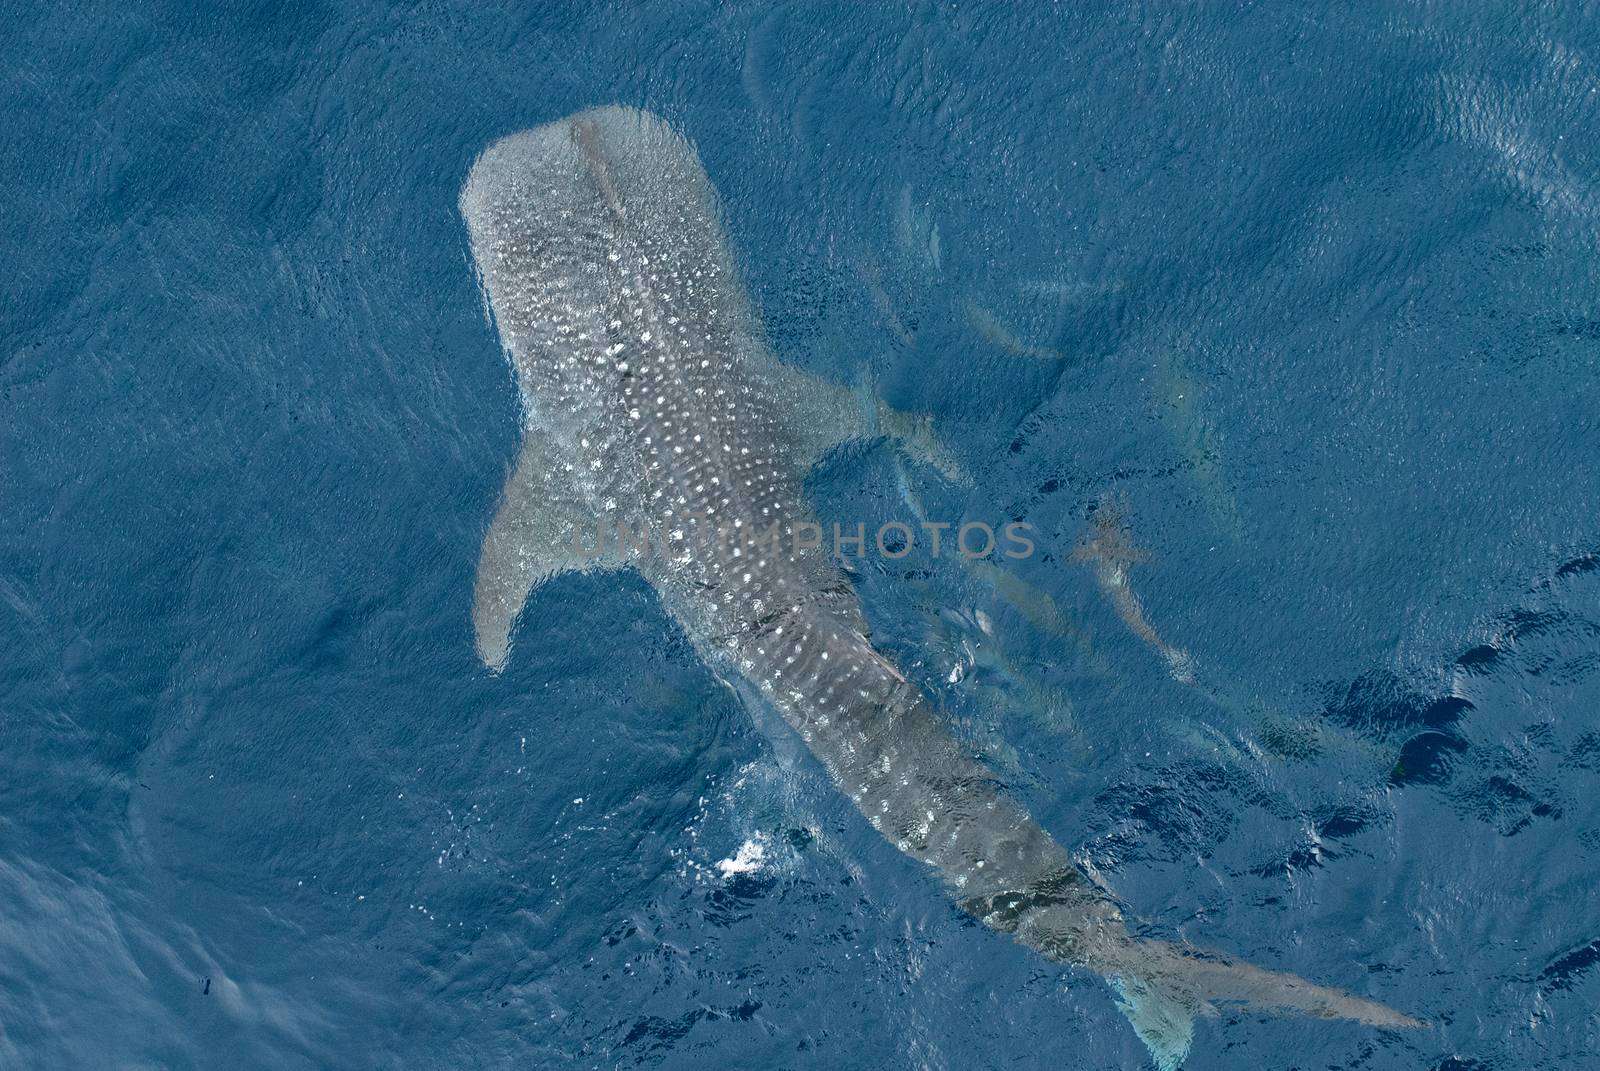 Large Whale shark from top view by think4photop